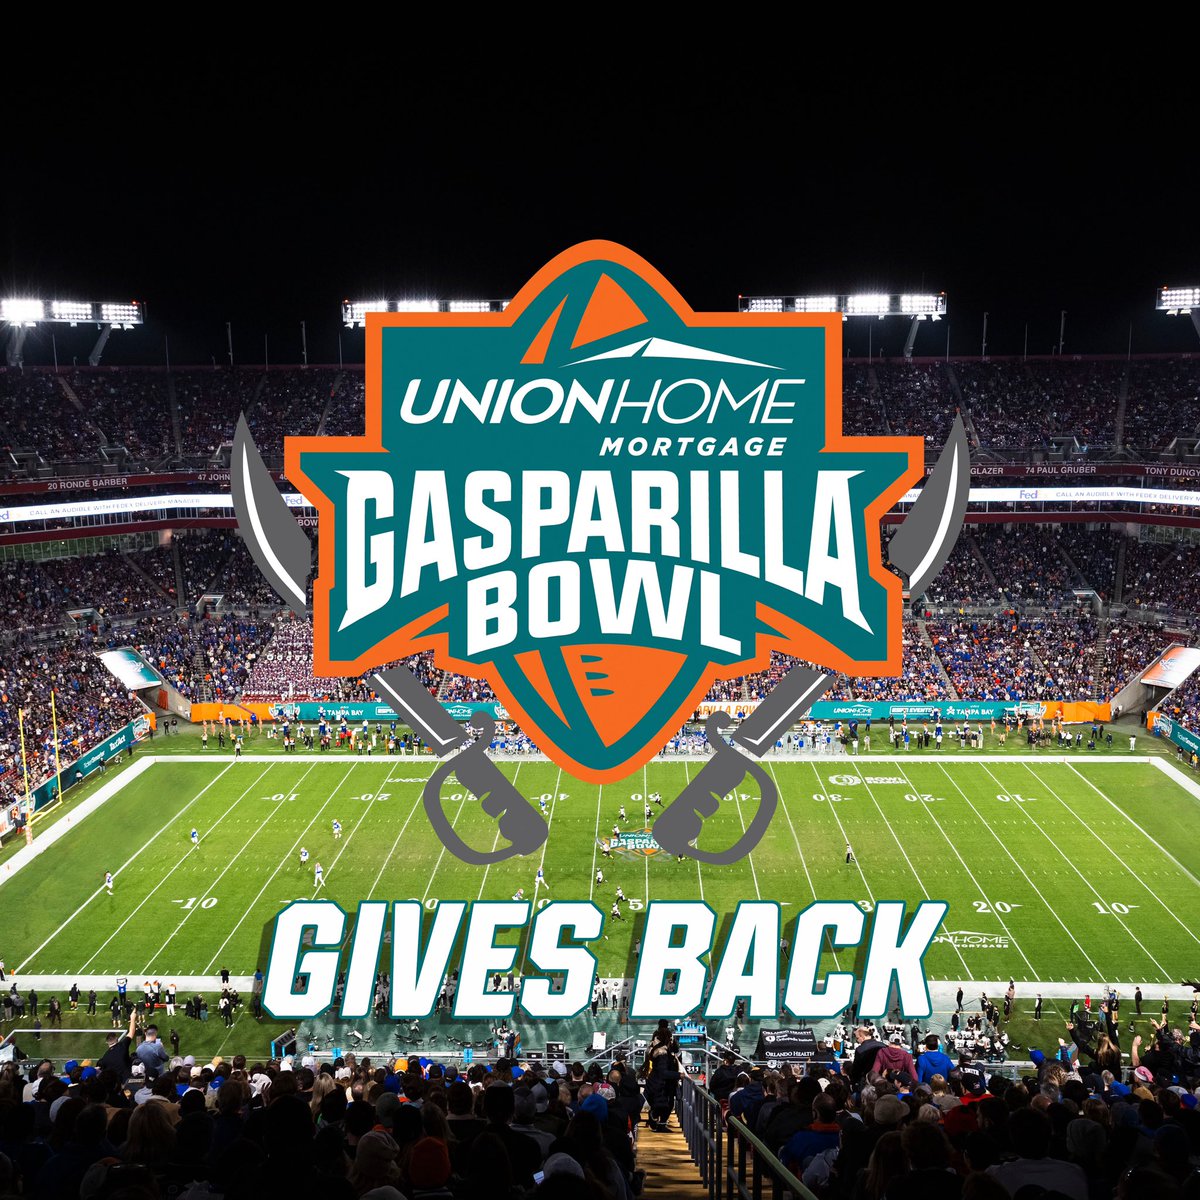 Union Home Mortgage Gasparilla Bowl on Twitter "Help recognize